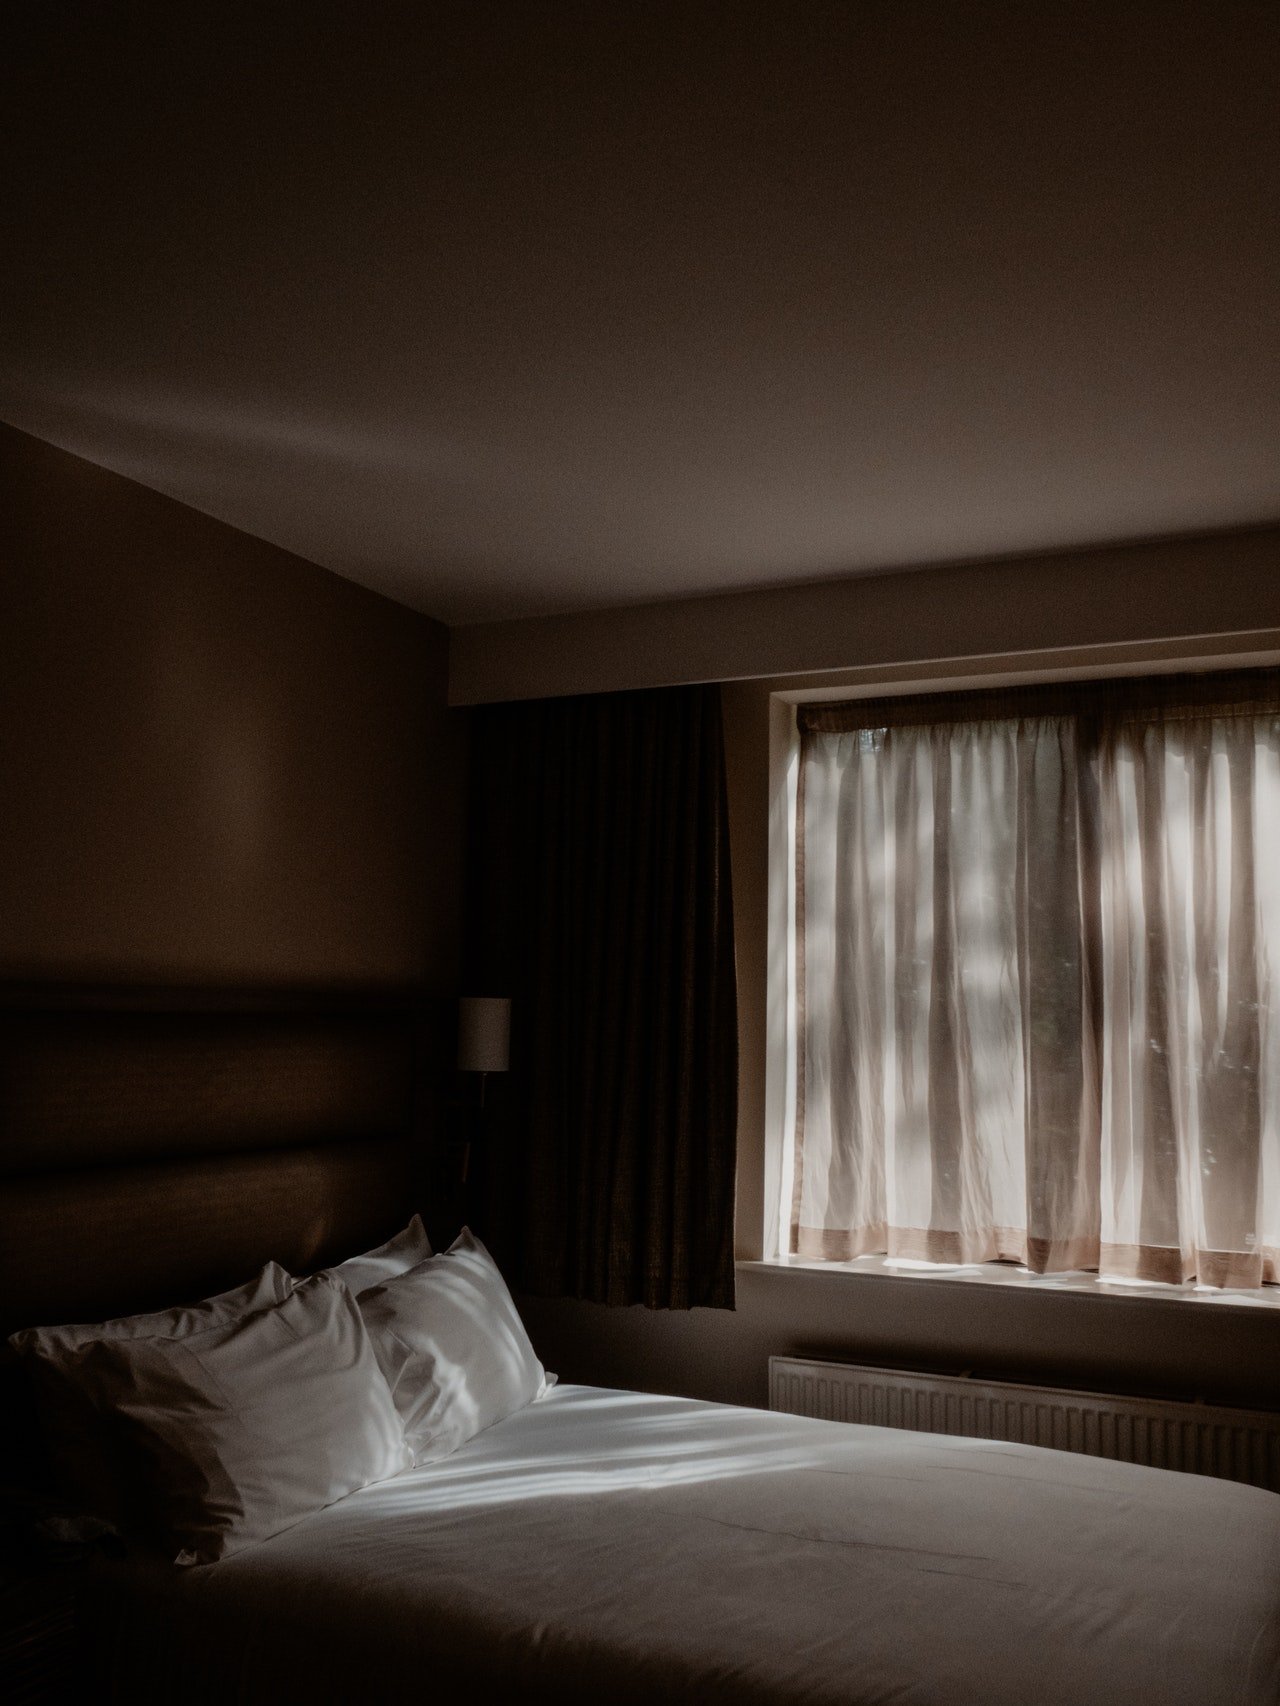 She got trapped inside the secret room but could see everything in the bedroom. | Source: Pexels